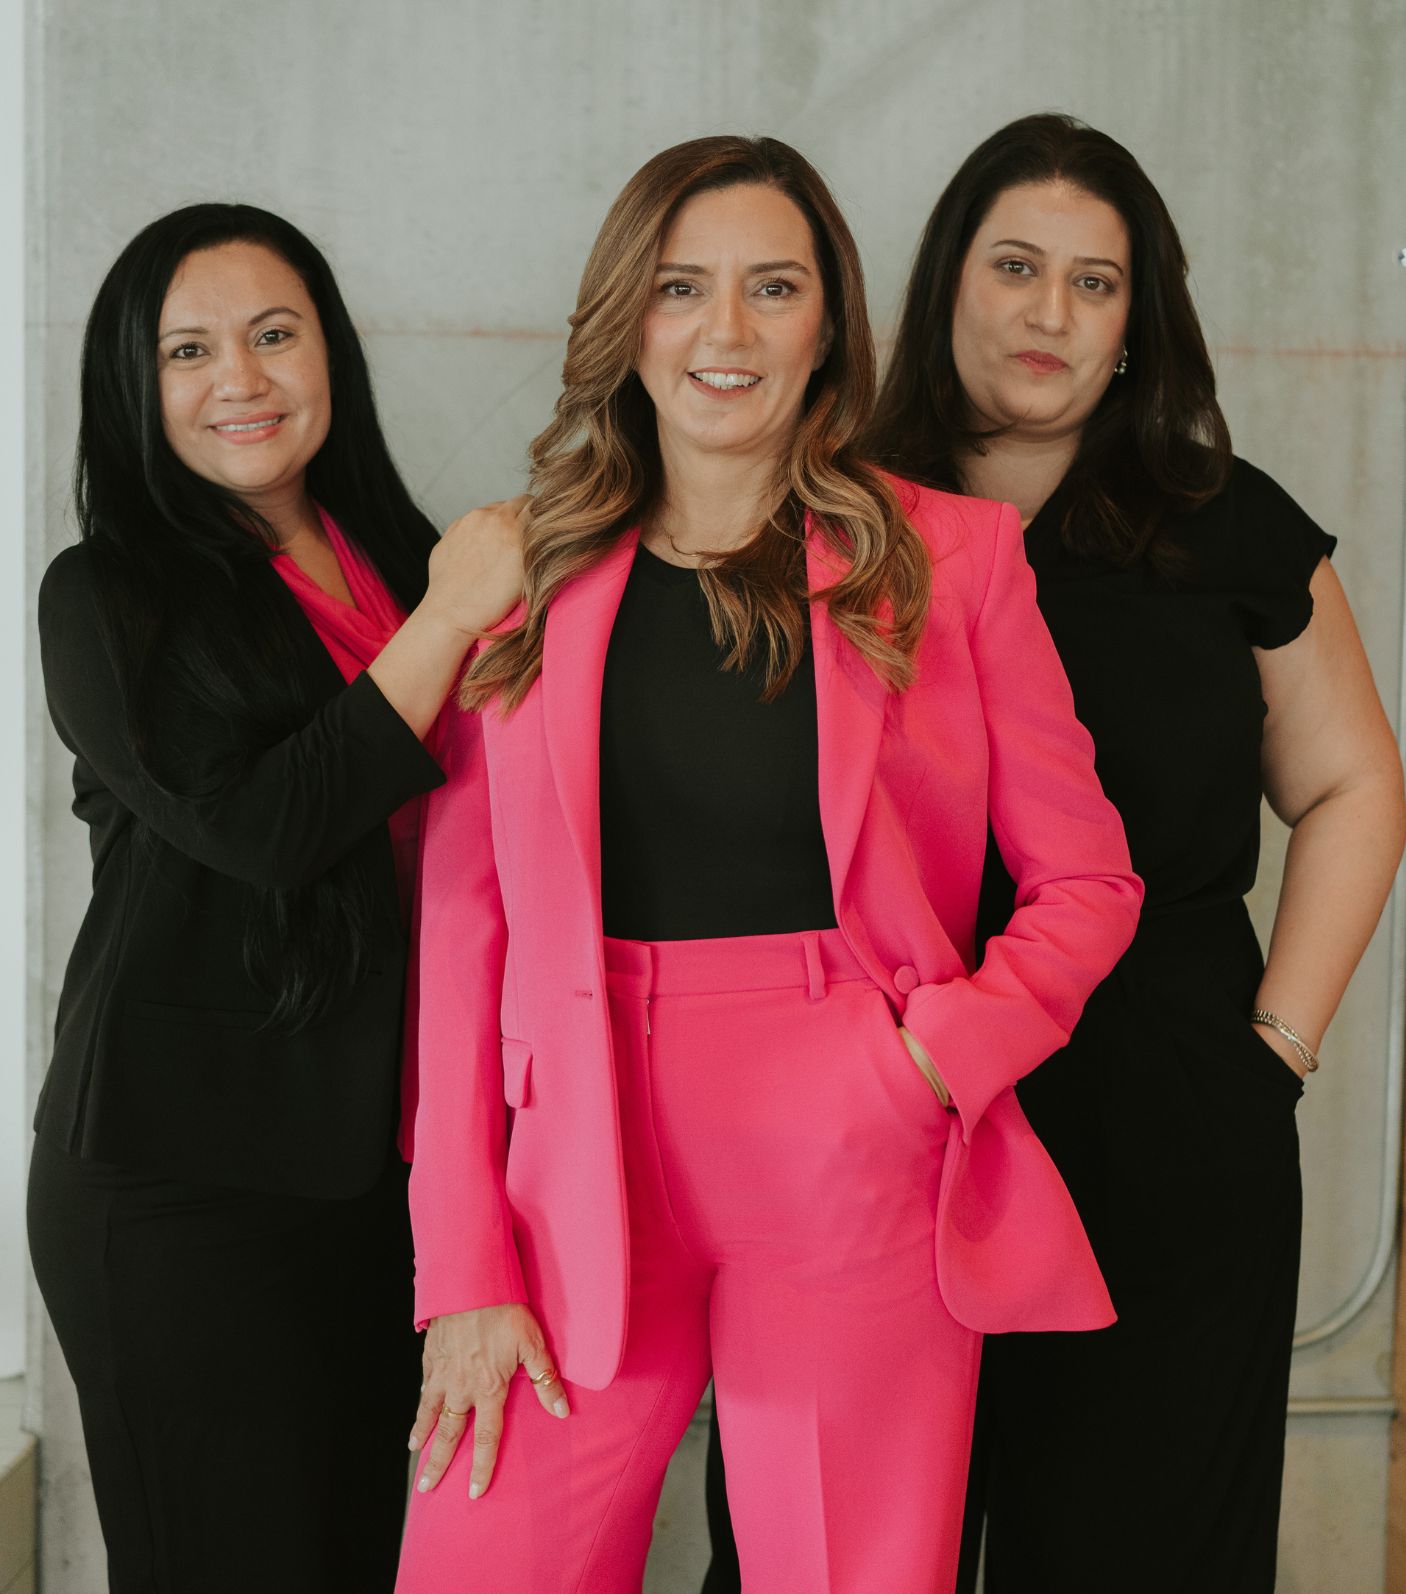 Affair recovery expert Idit Sharoni, LMFT and her team of experts standing. If you're in the aftermath of infidelity and want to end your affair and save your marriage, we can help! Book a free 45-minute consult with our Infidelity Recovery Program specialist to see how we can help now. 